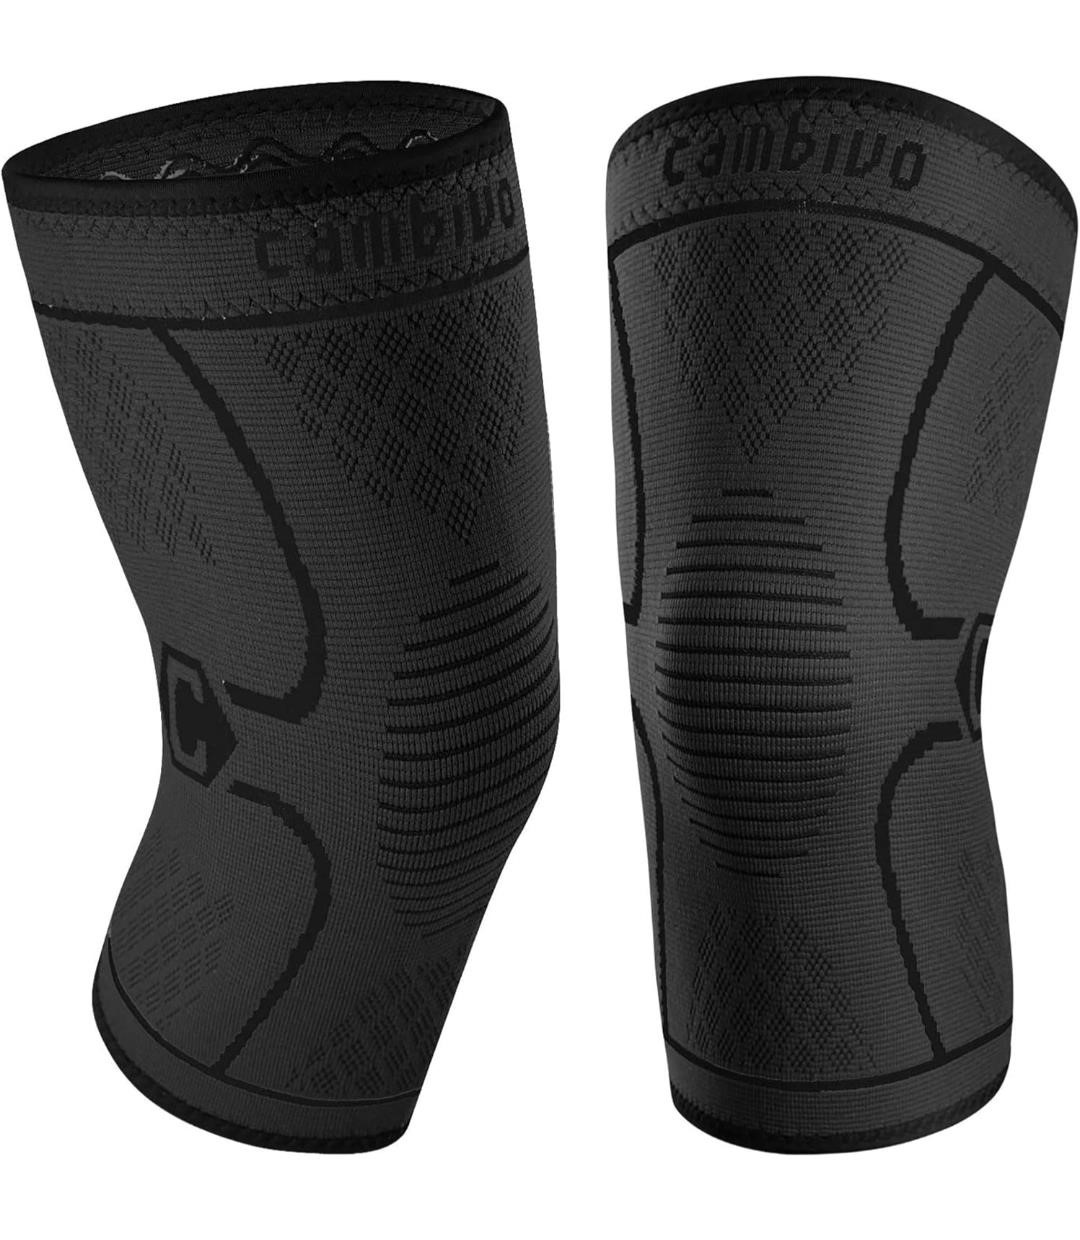 2 PACK CAMBIVO KNEE BRACE SUPPORT